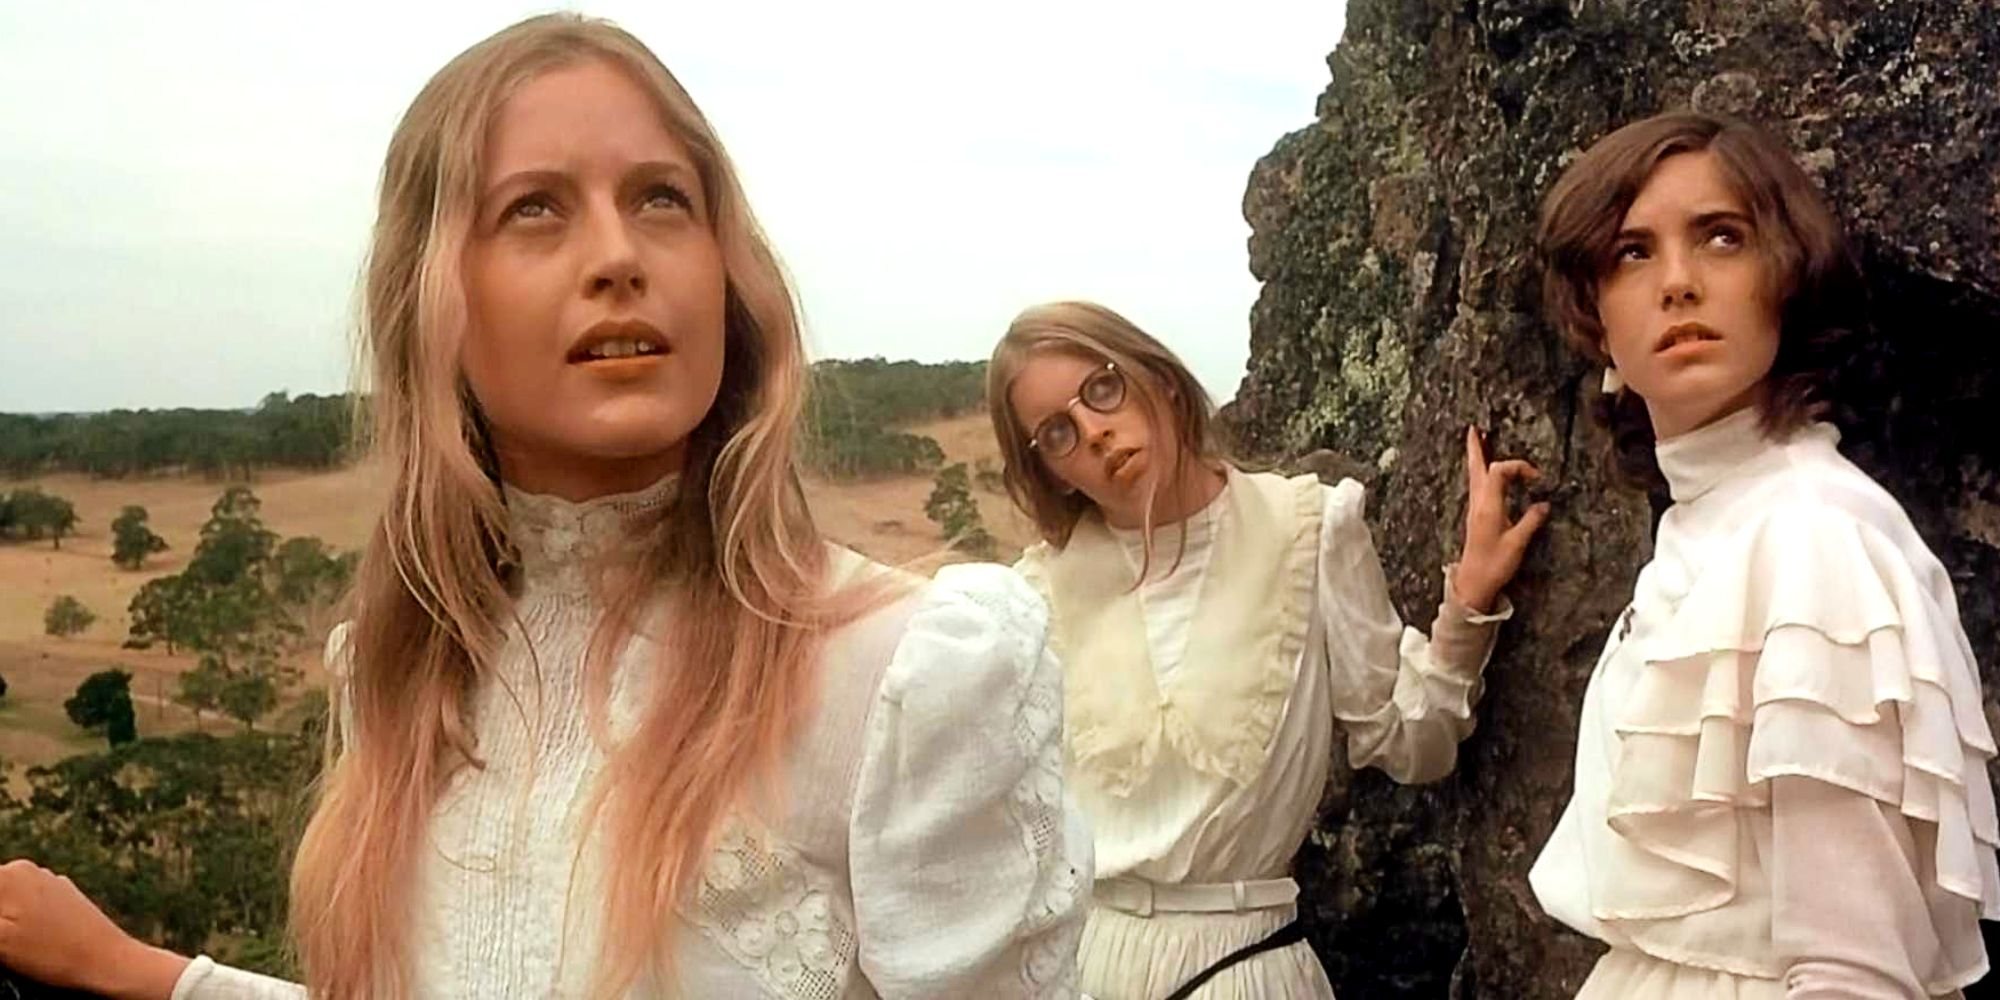 Scene of three women from Picnic at Hanging Rock